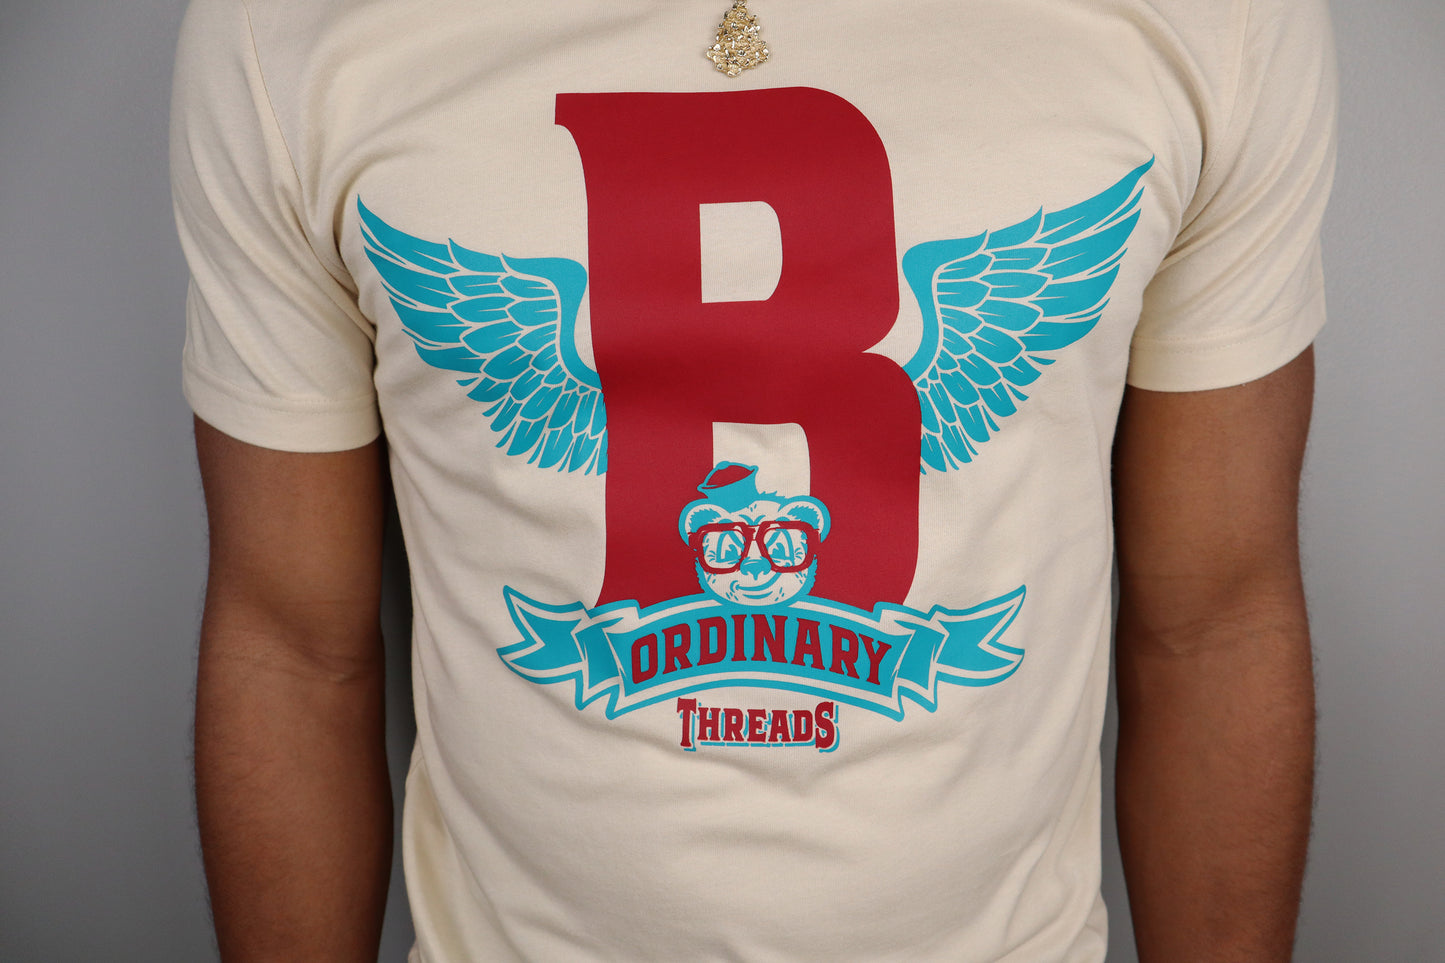 Barely "Winged B" Tee (Burg/Teal) - Barely Ordinary